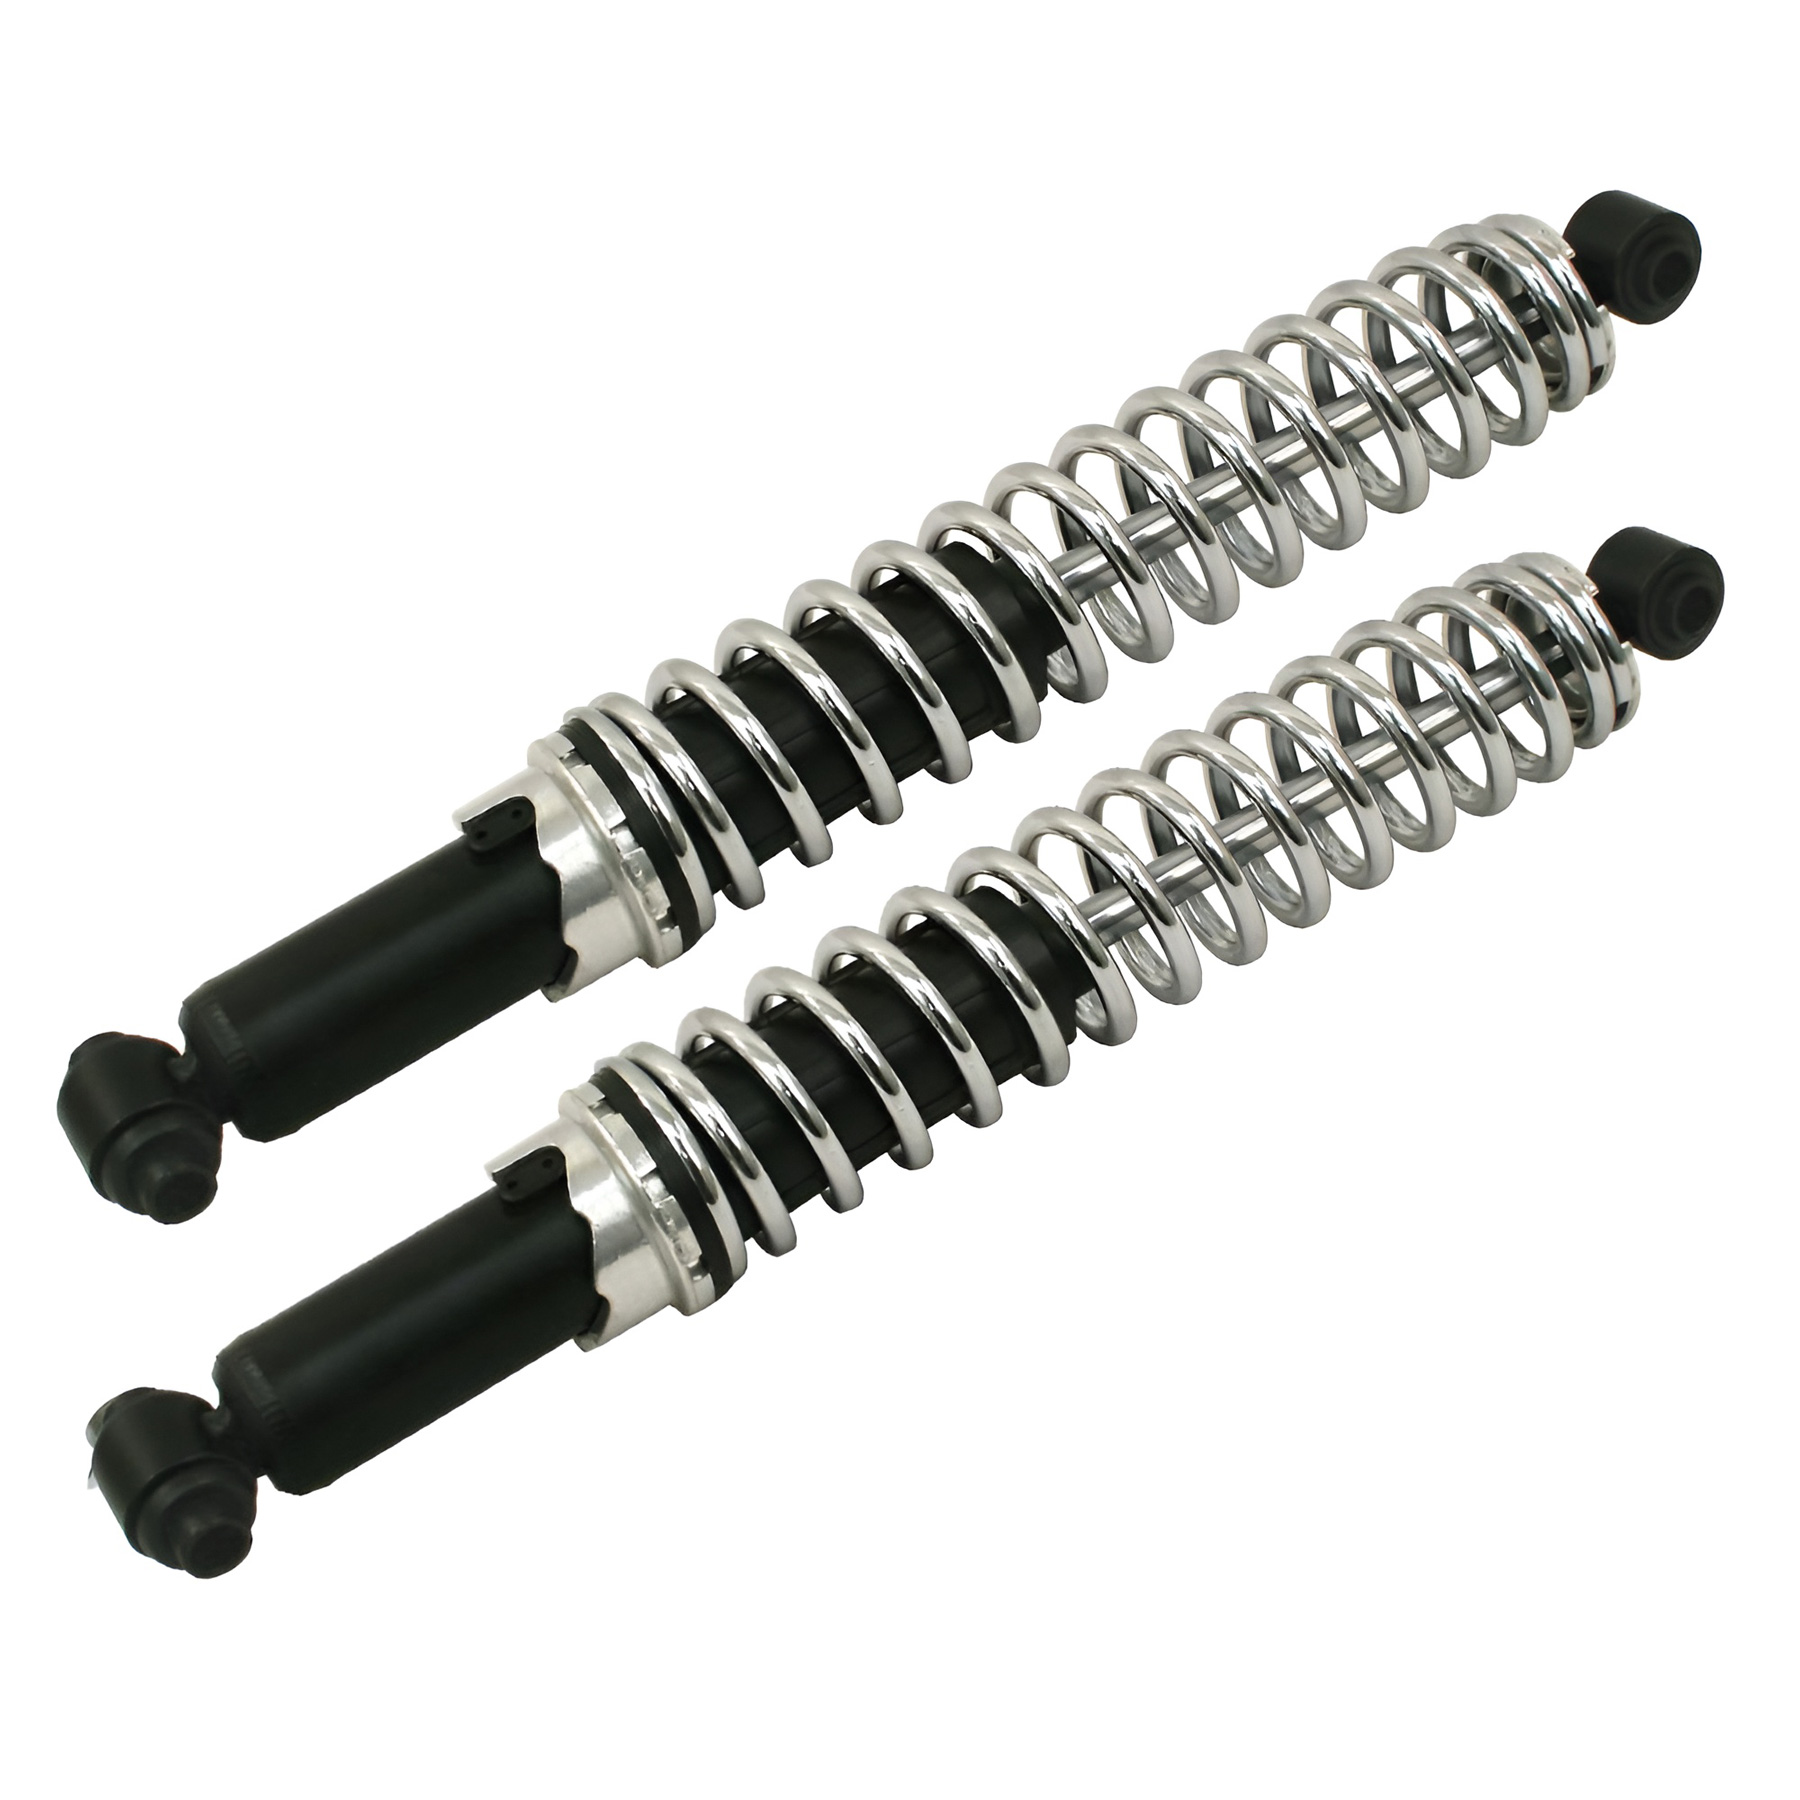 VW Coil Over Shocks - Rear All Beetle - Ghia - Type 3 - 1954-65 Beetle - Ghia - 55-67 Bus Front Link